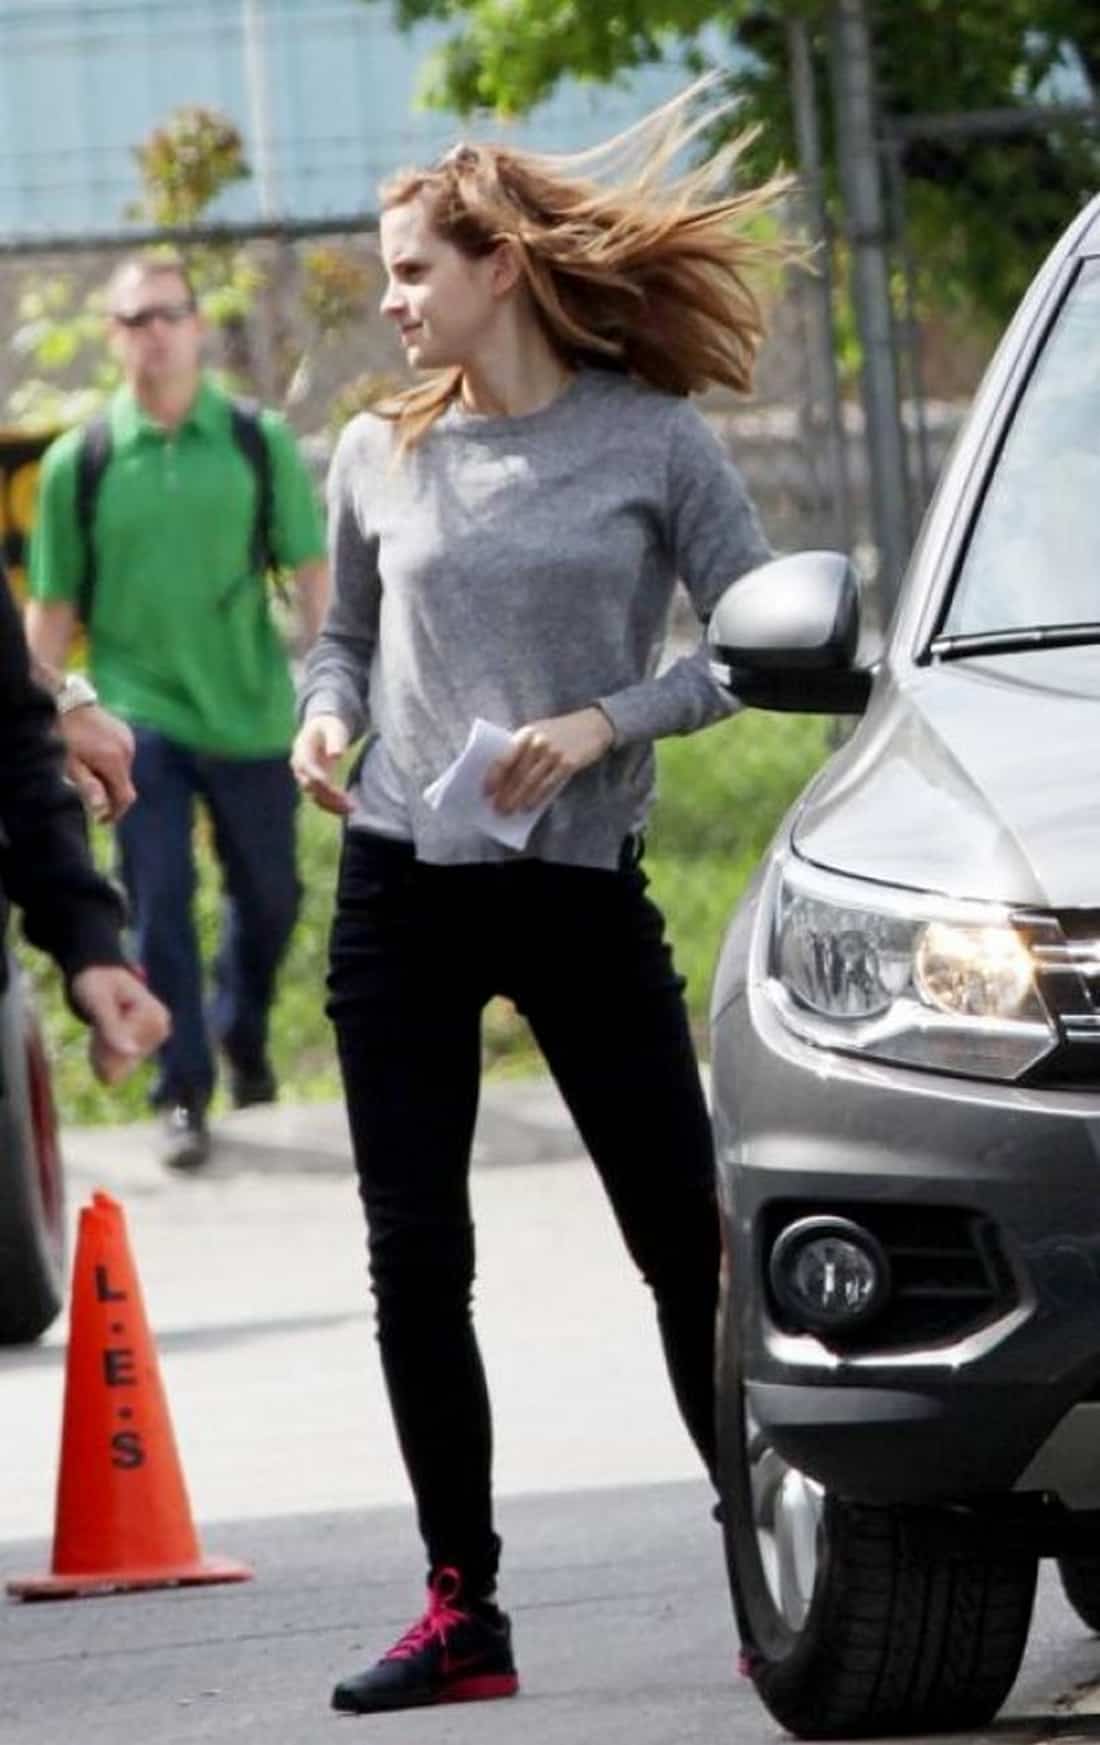 Emma Watson Stuns in a Gray Sweater and Jeans on the Set of "Regression"